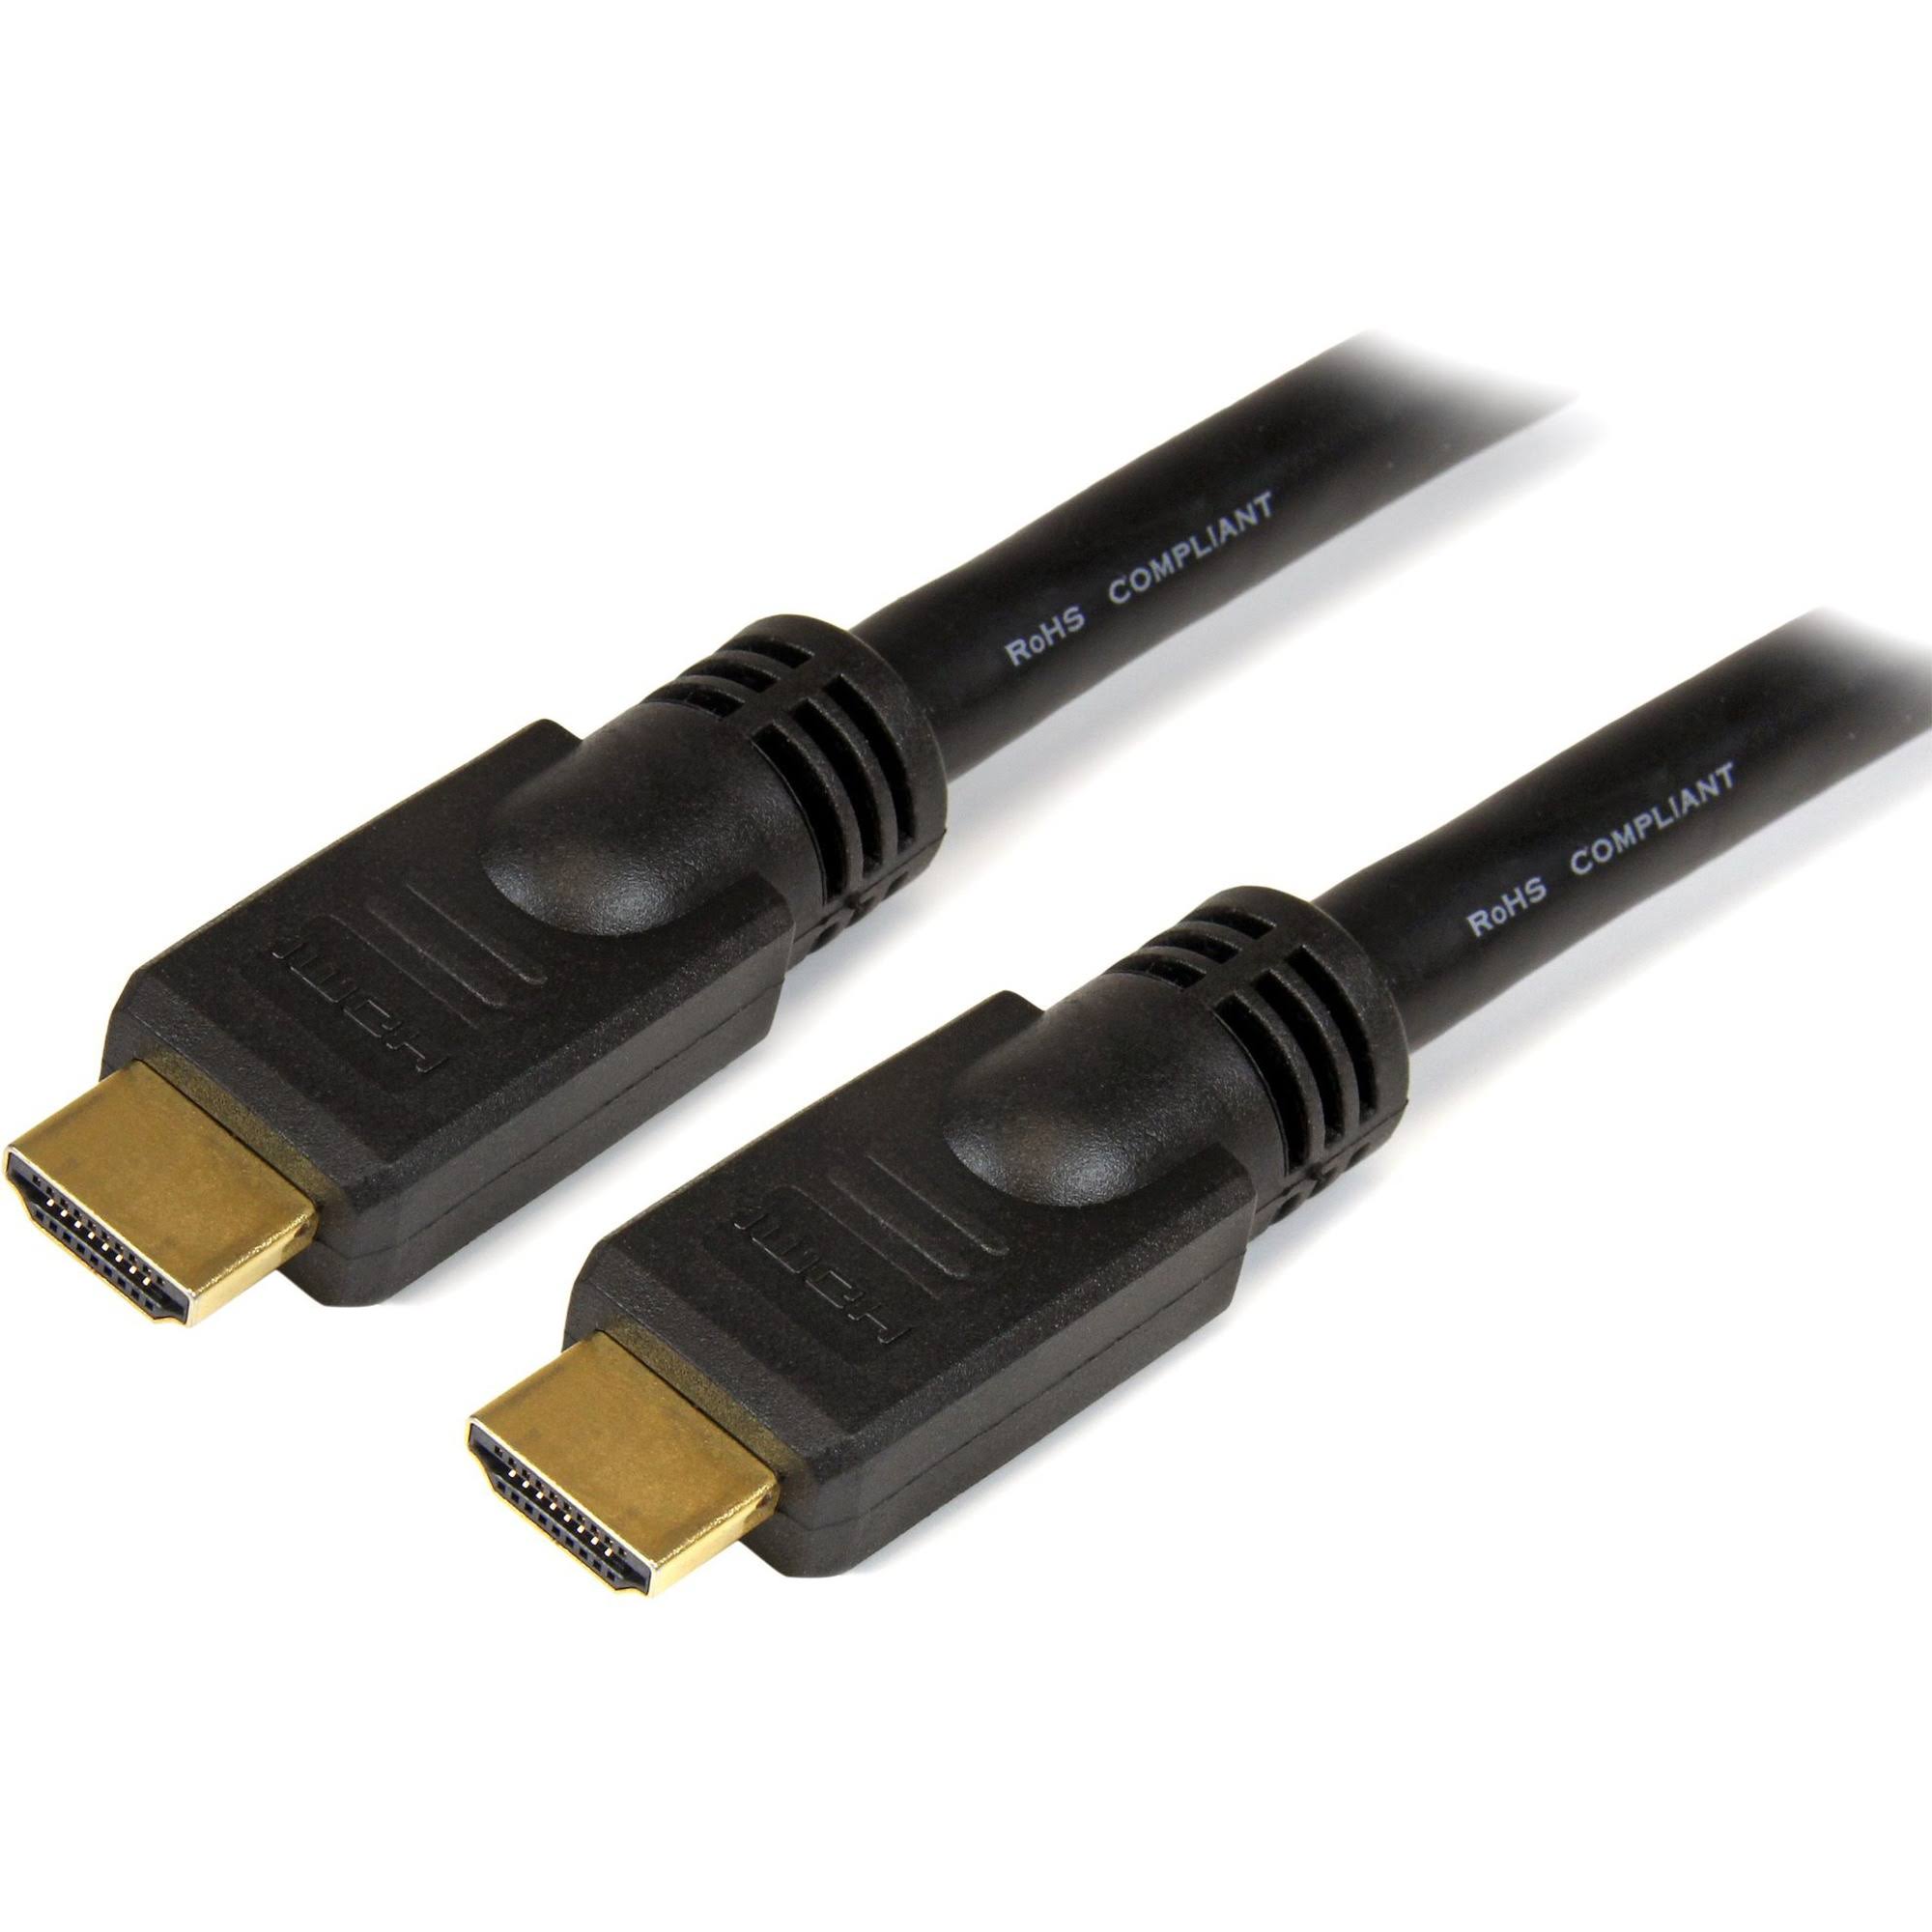 StarTech.com 30 ft High Speed HDMI Cable - HDMI to